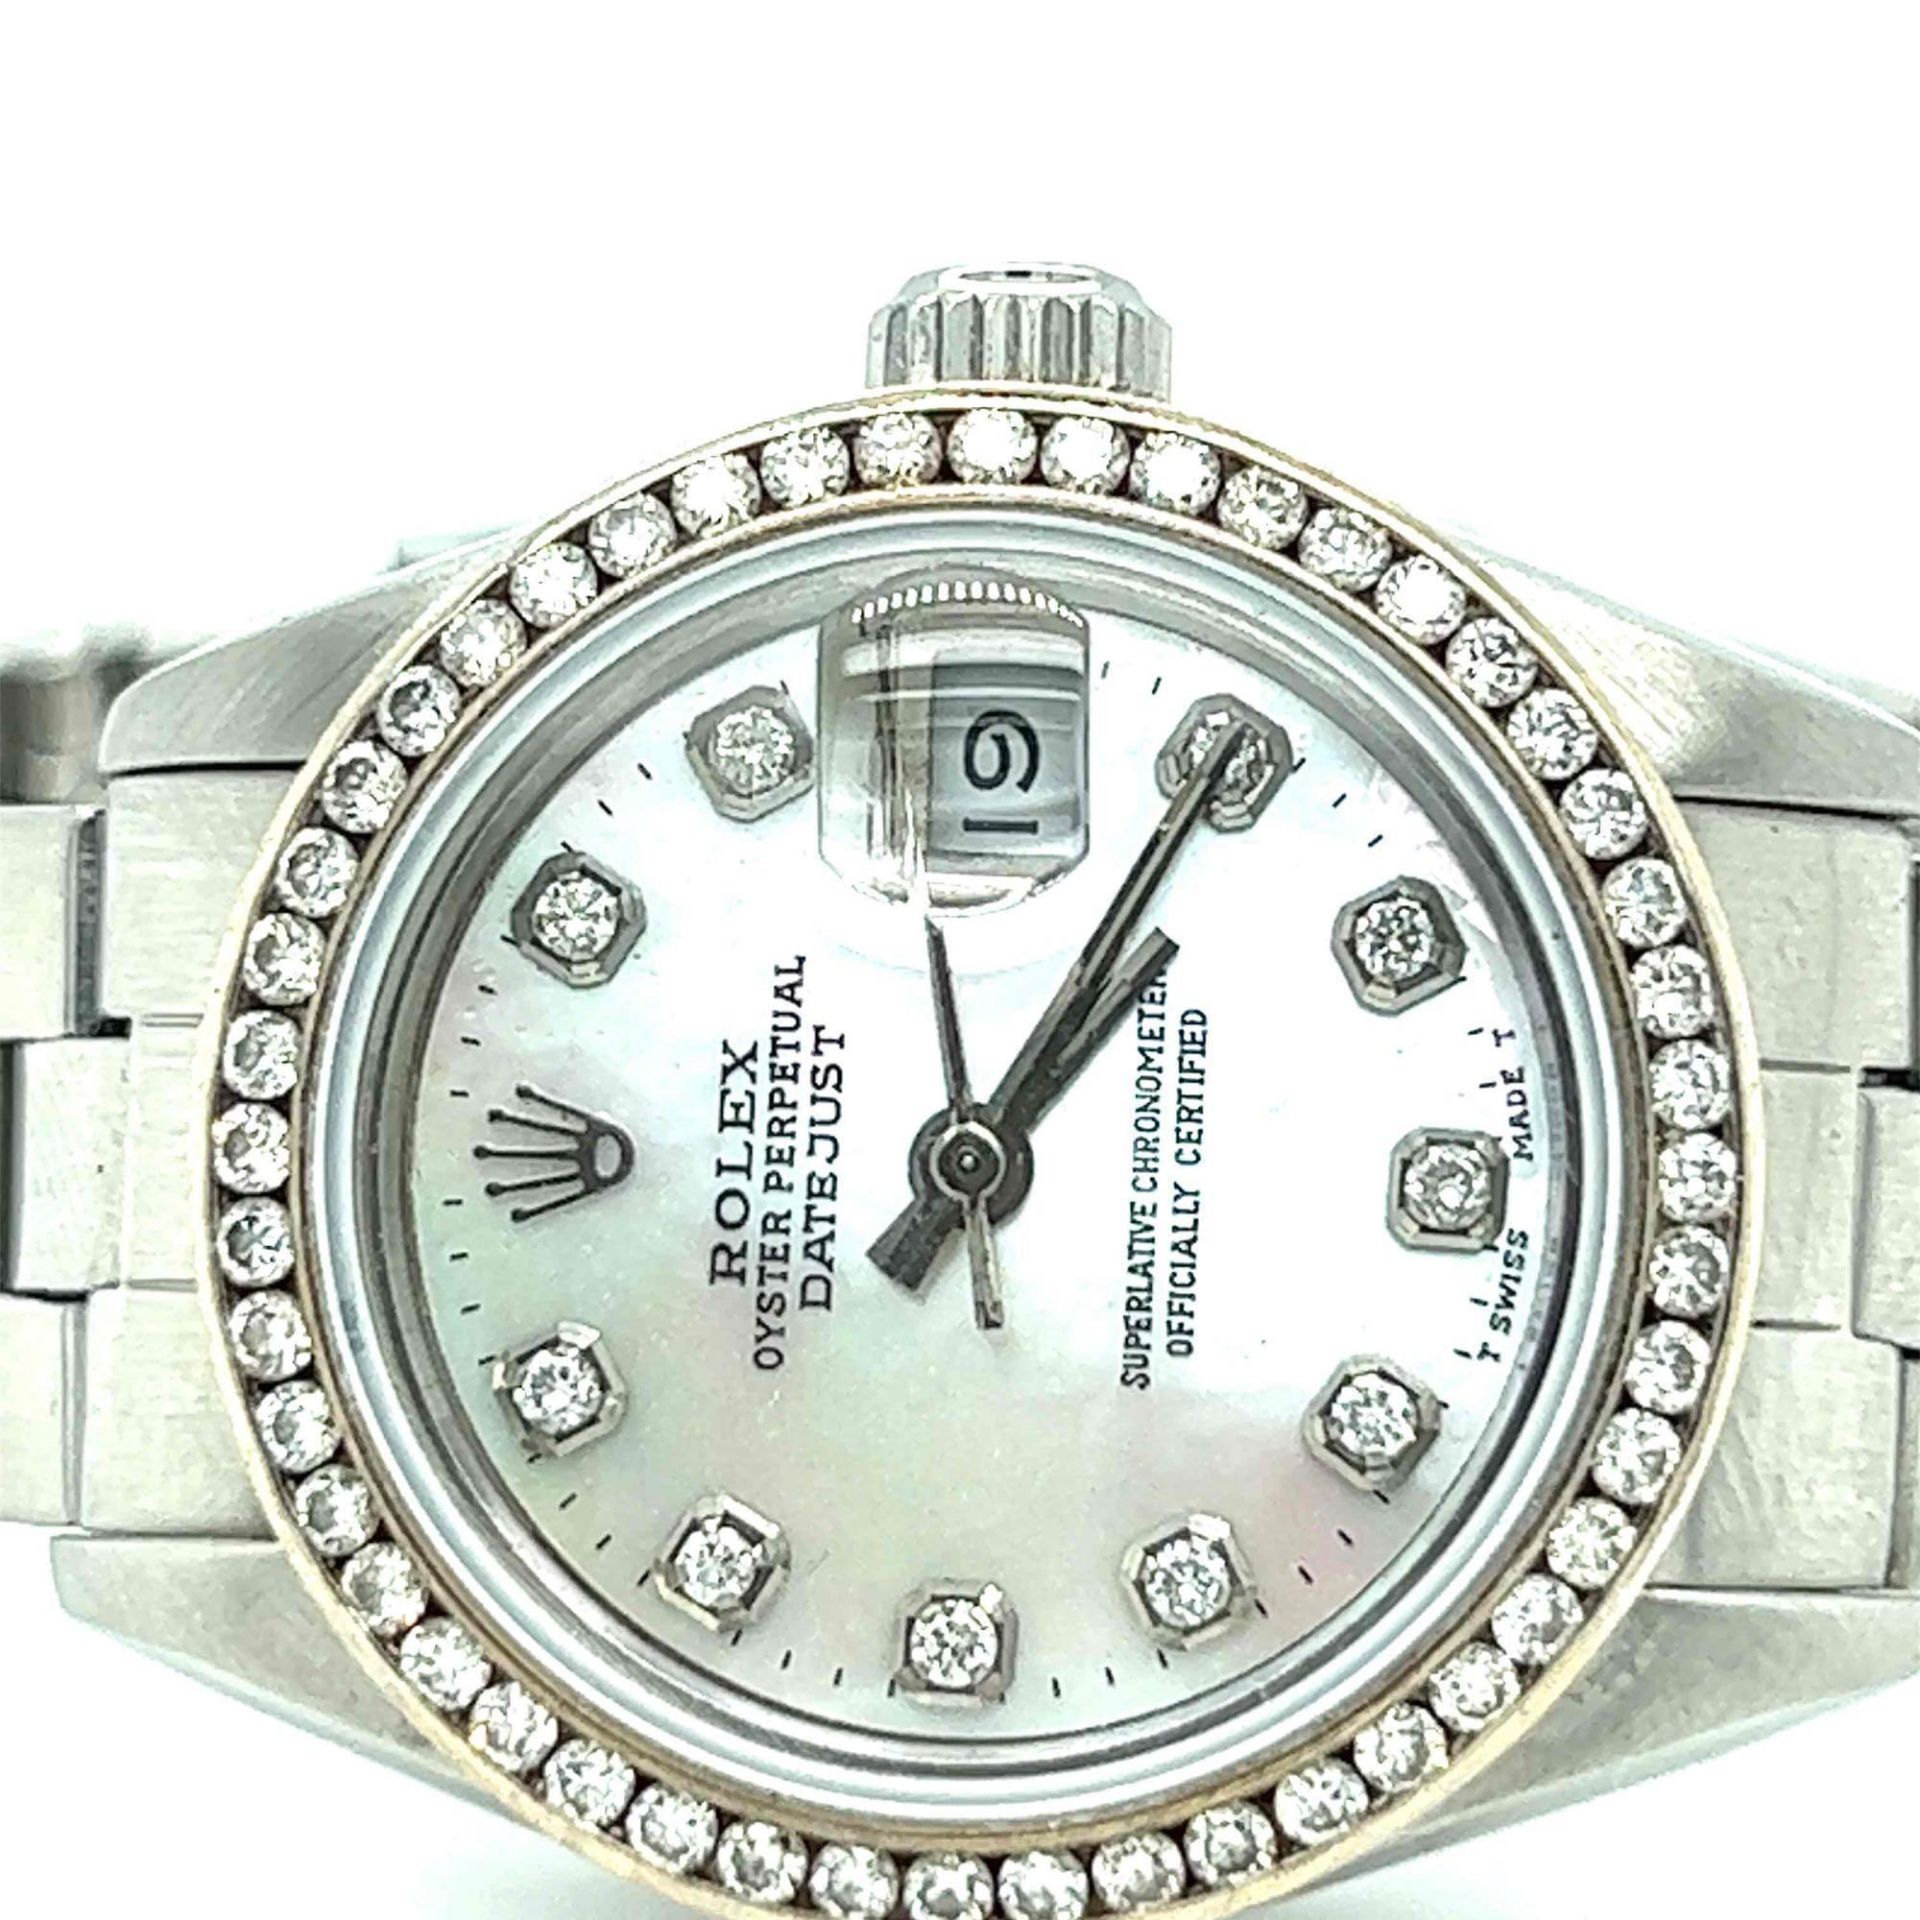 PREOWNED ROLEX LADY DATEJUST STAINLESS STEEL DIAMONDS. - Image 5 of 5